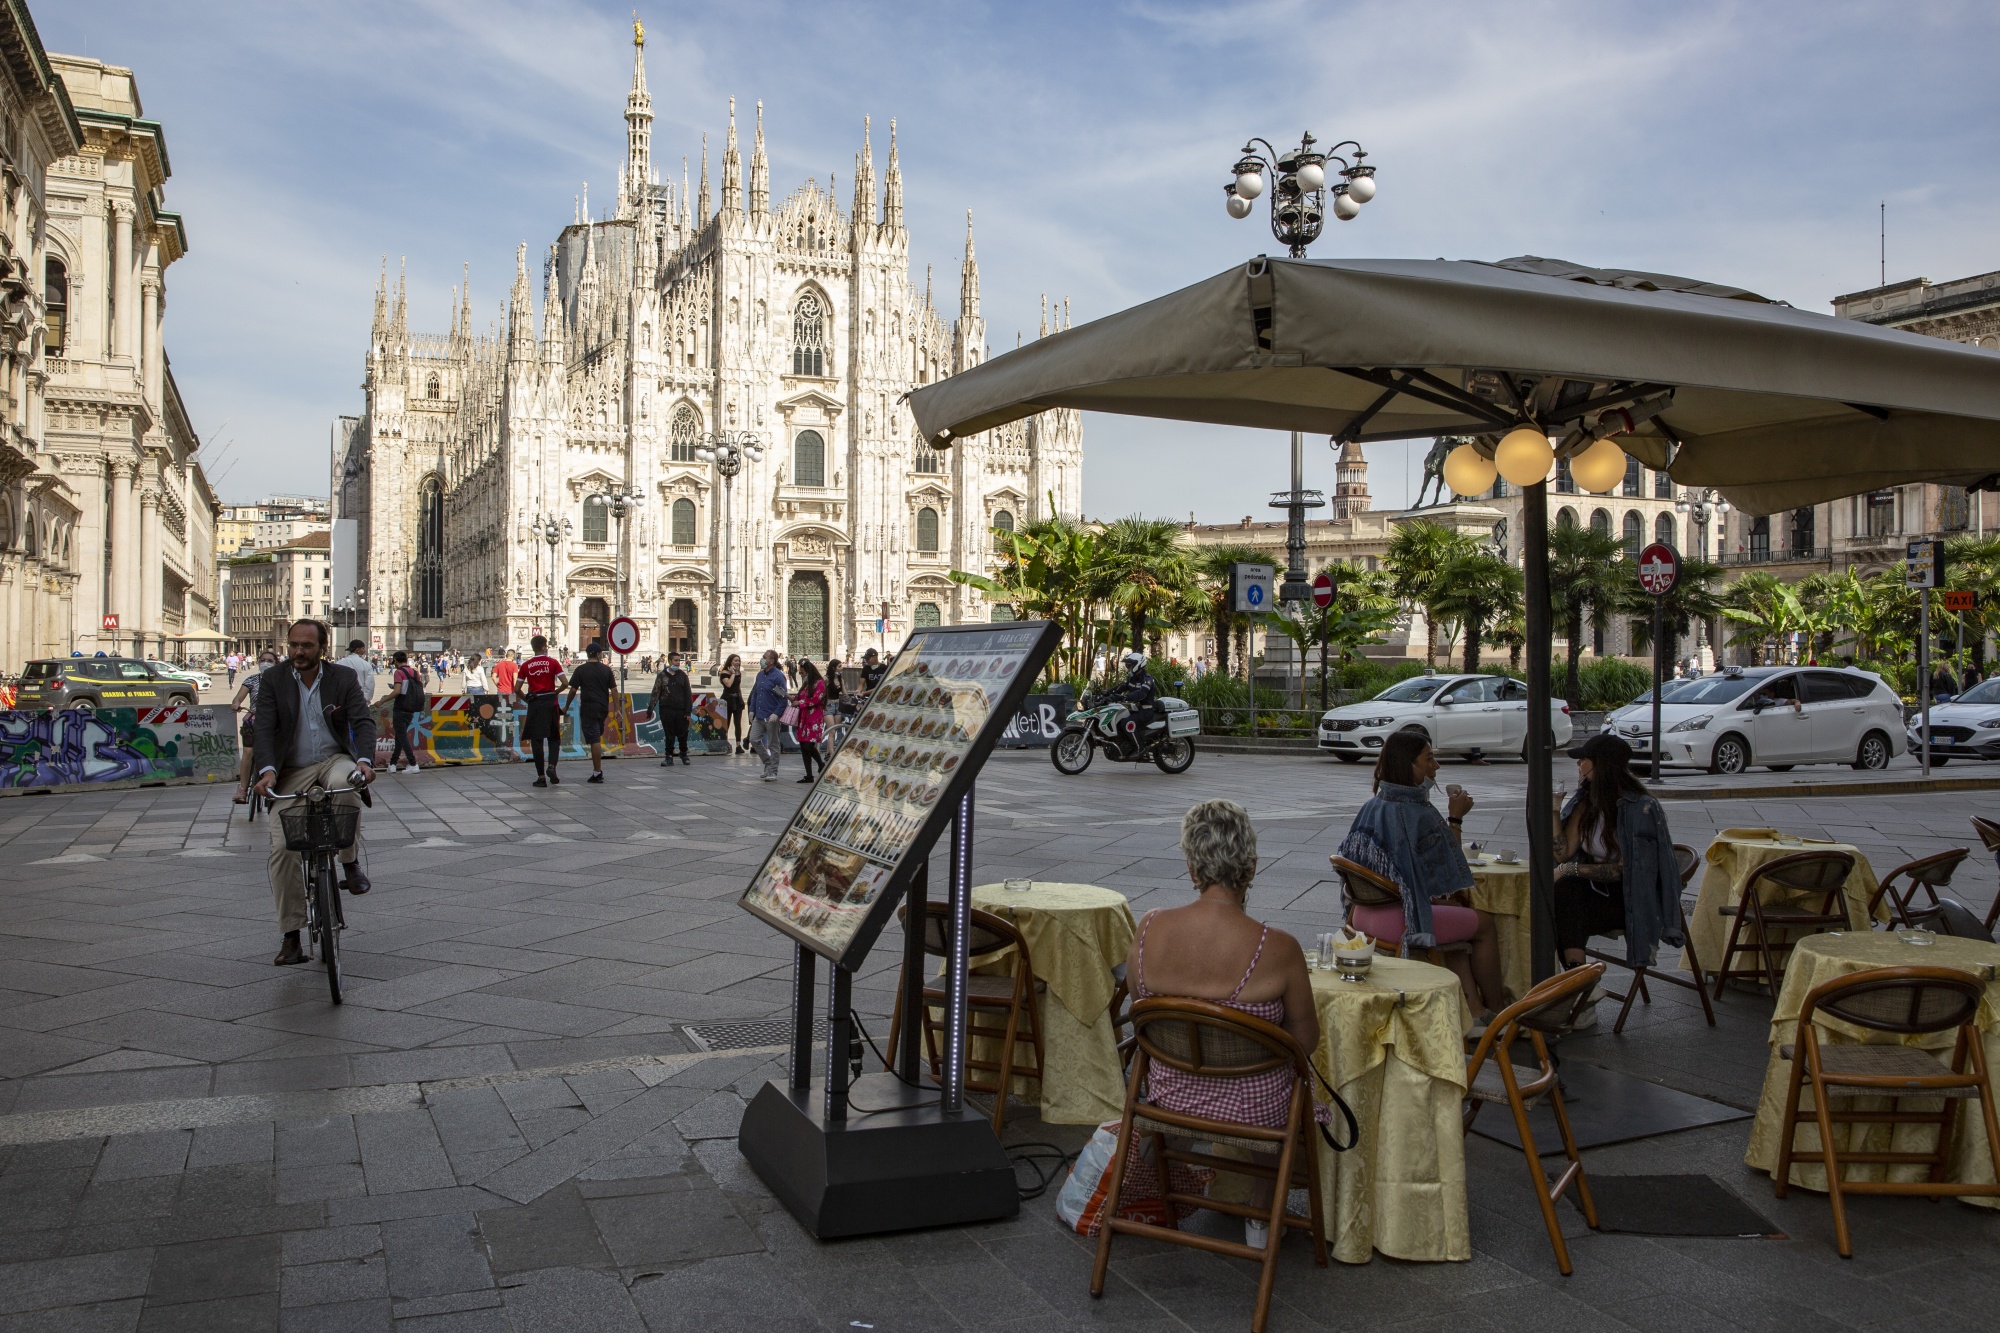 People eat at a restaurant in the Cathedral square in Milan.